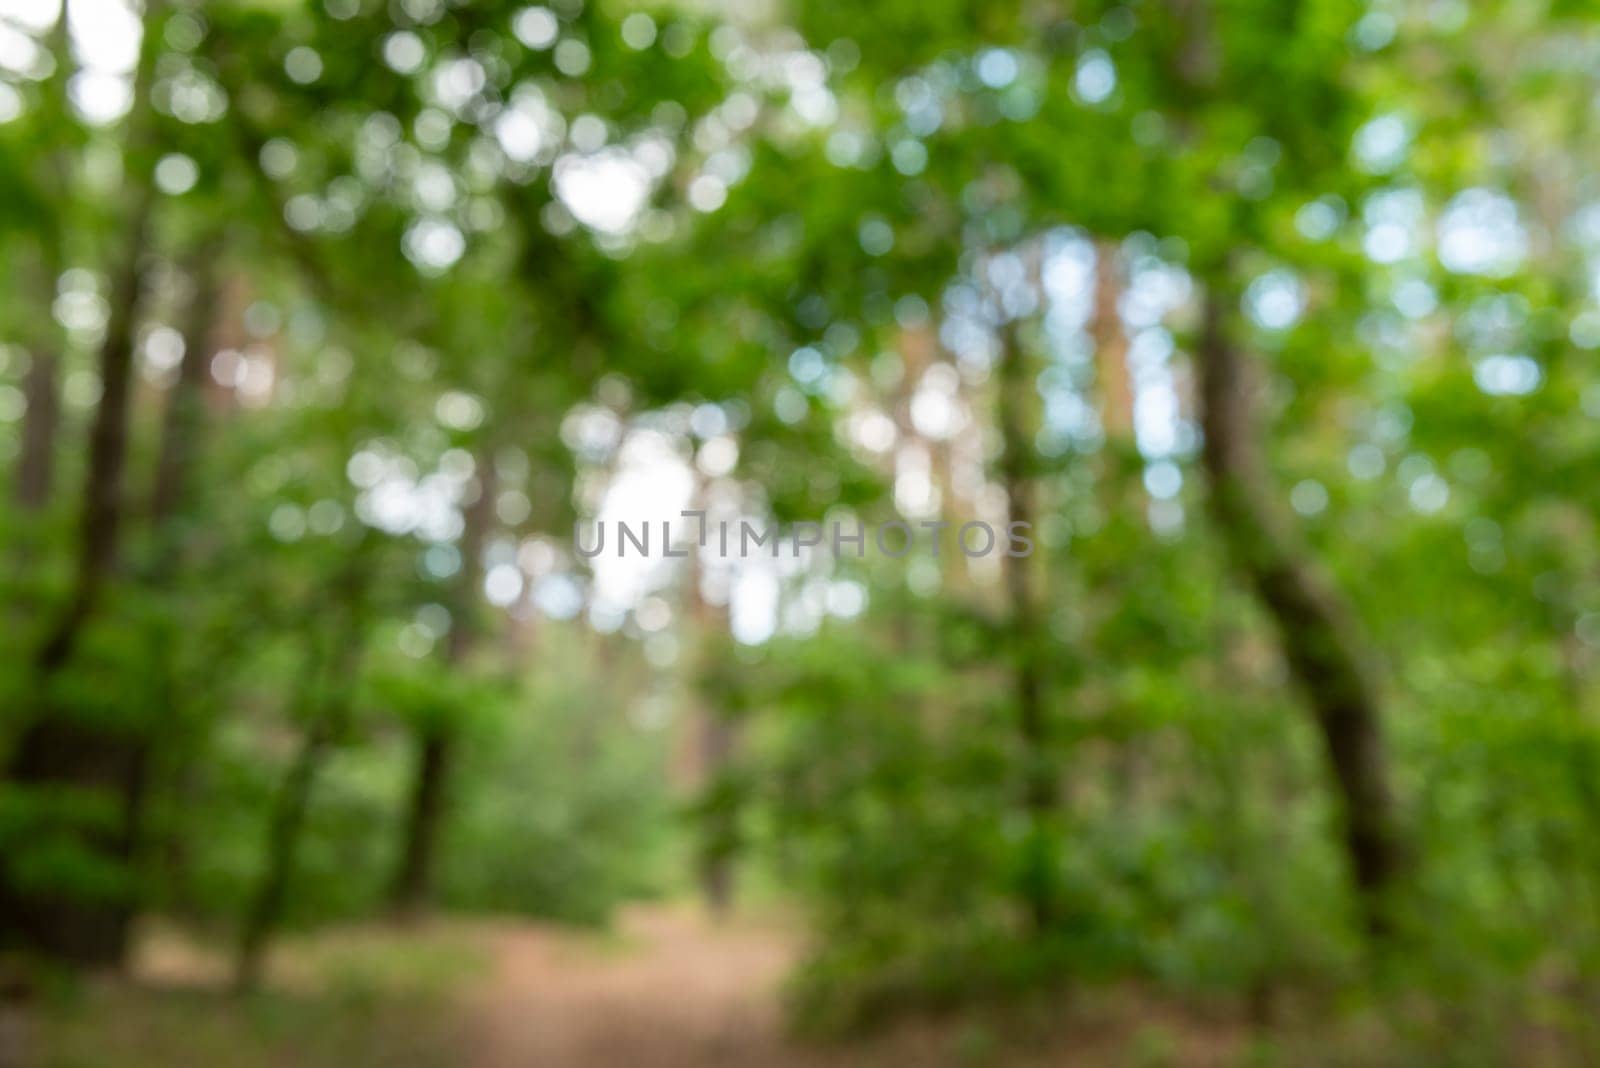 Blurred trees with green leaves as a background by VitaliiPetrushenko